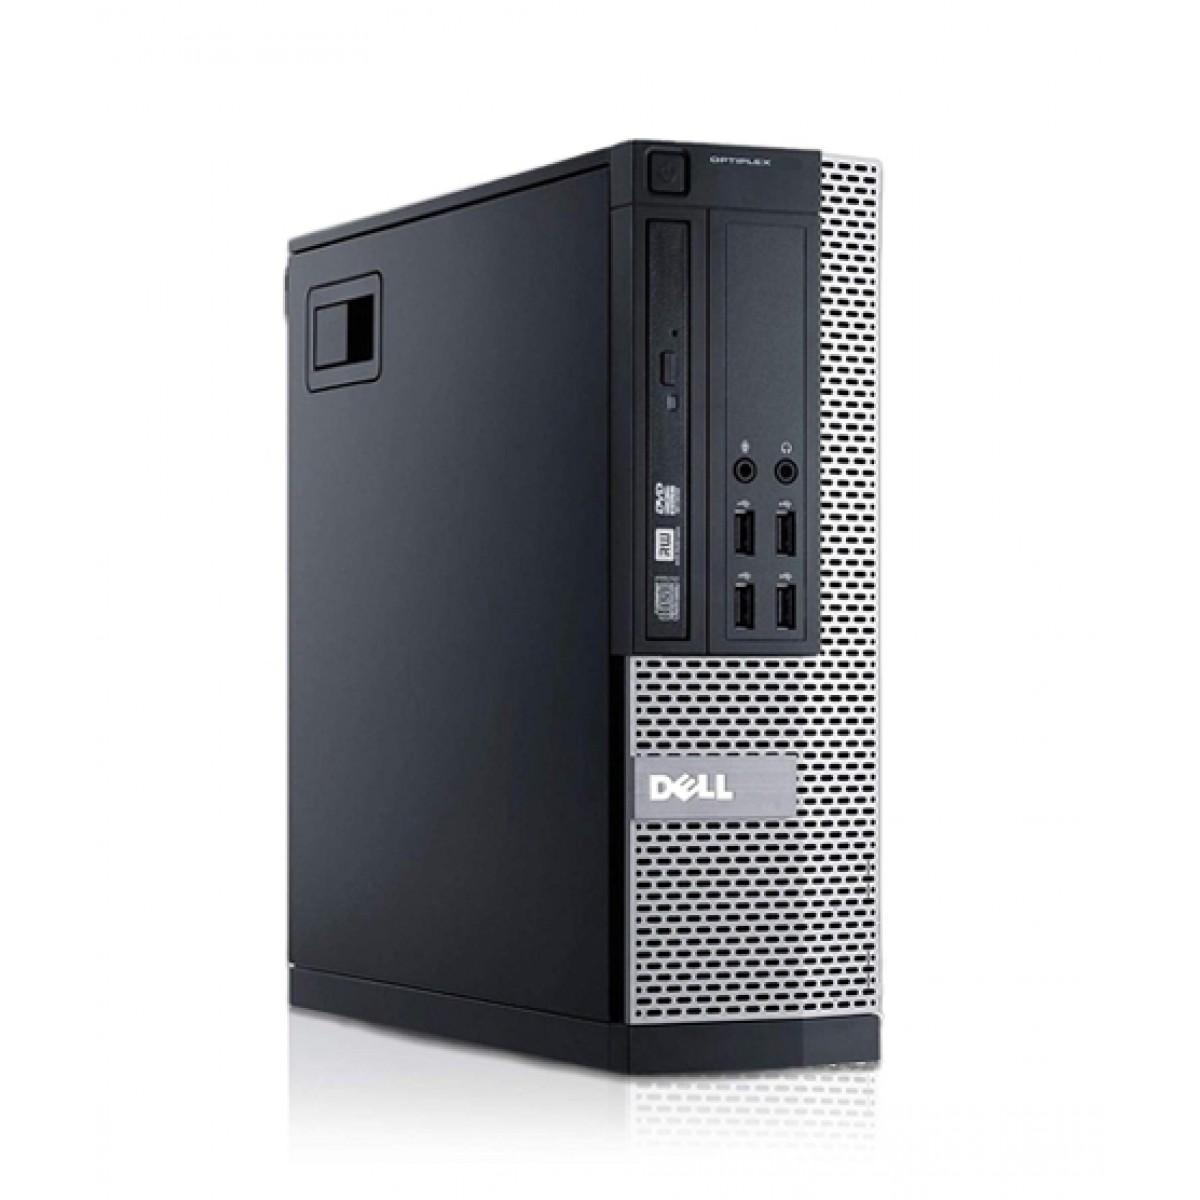 Dell OptiPlex 790 Small Form Factor Owner’s Manual